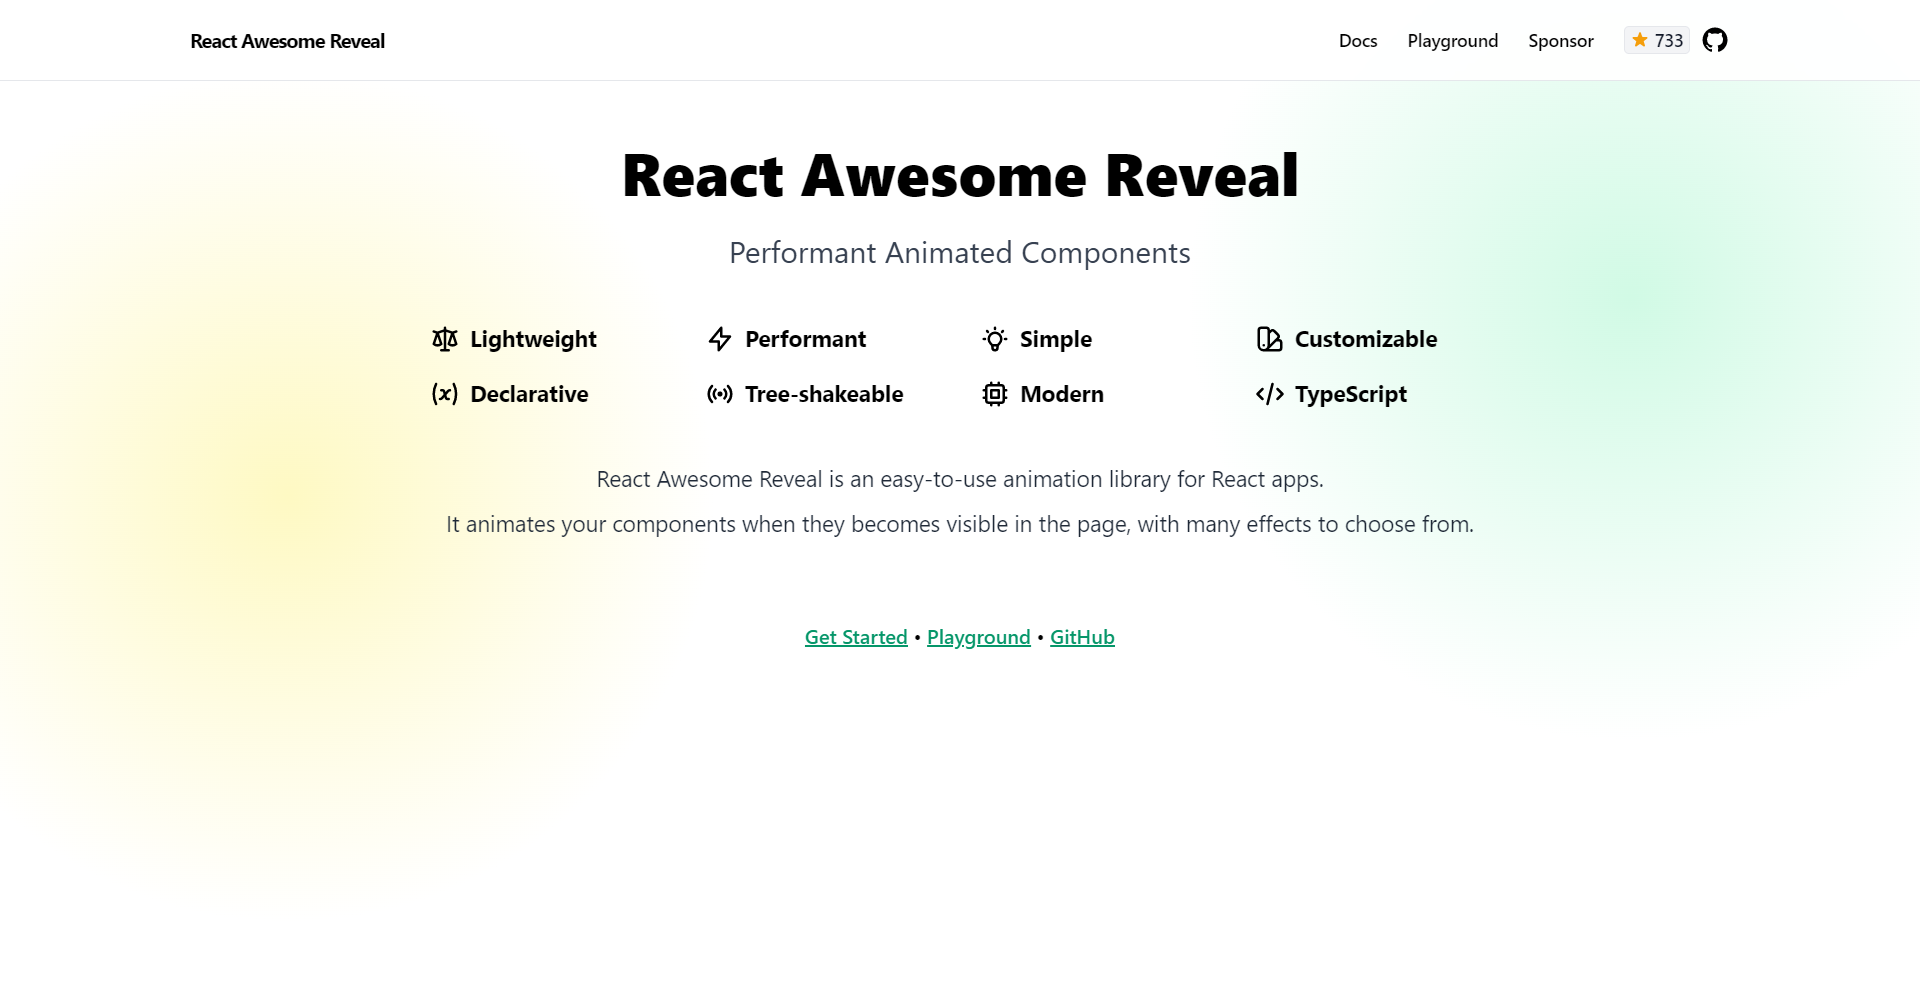 React Awesome Reveal